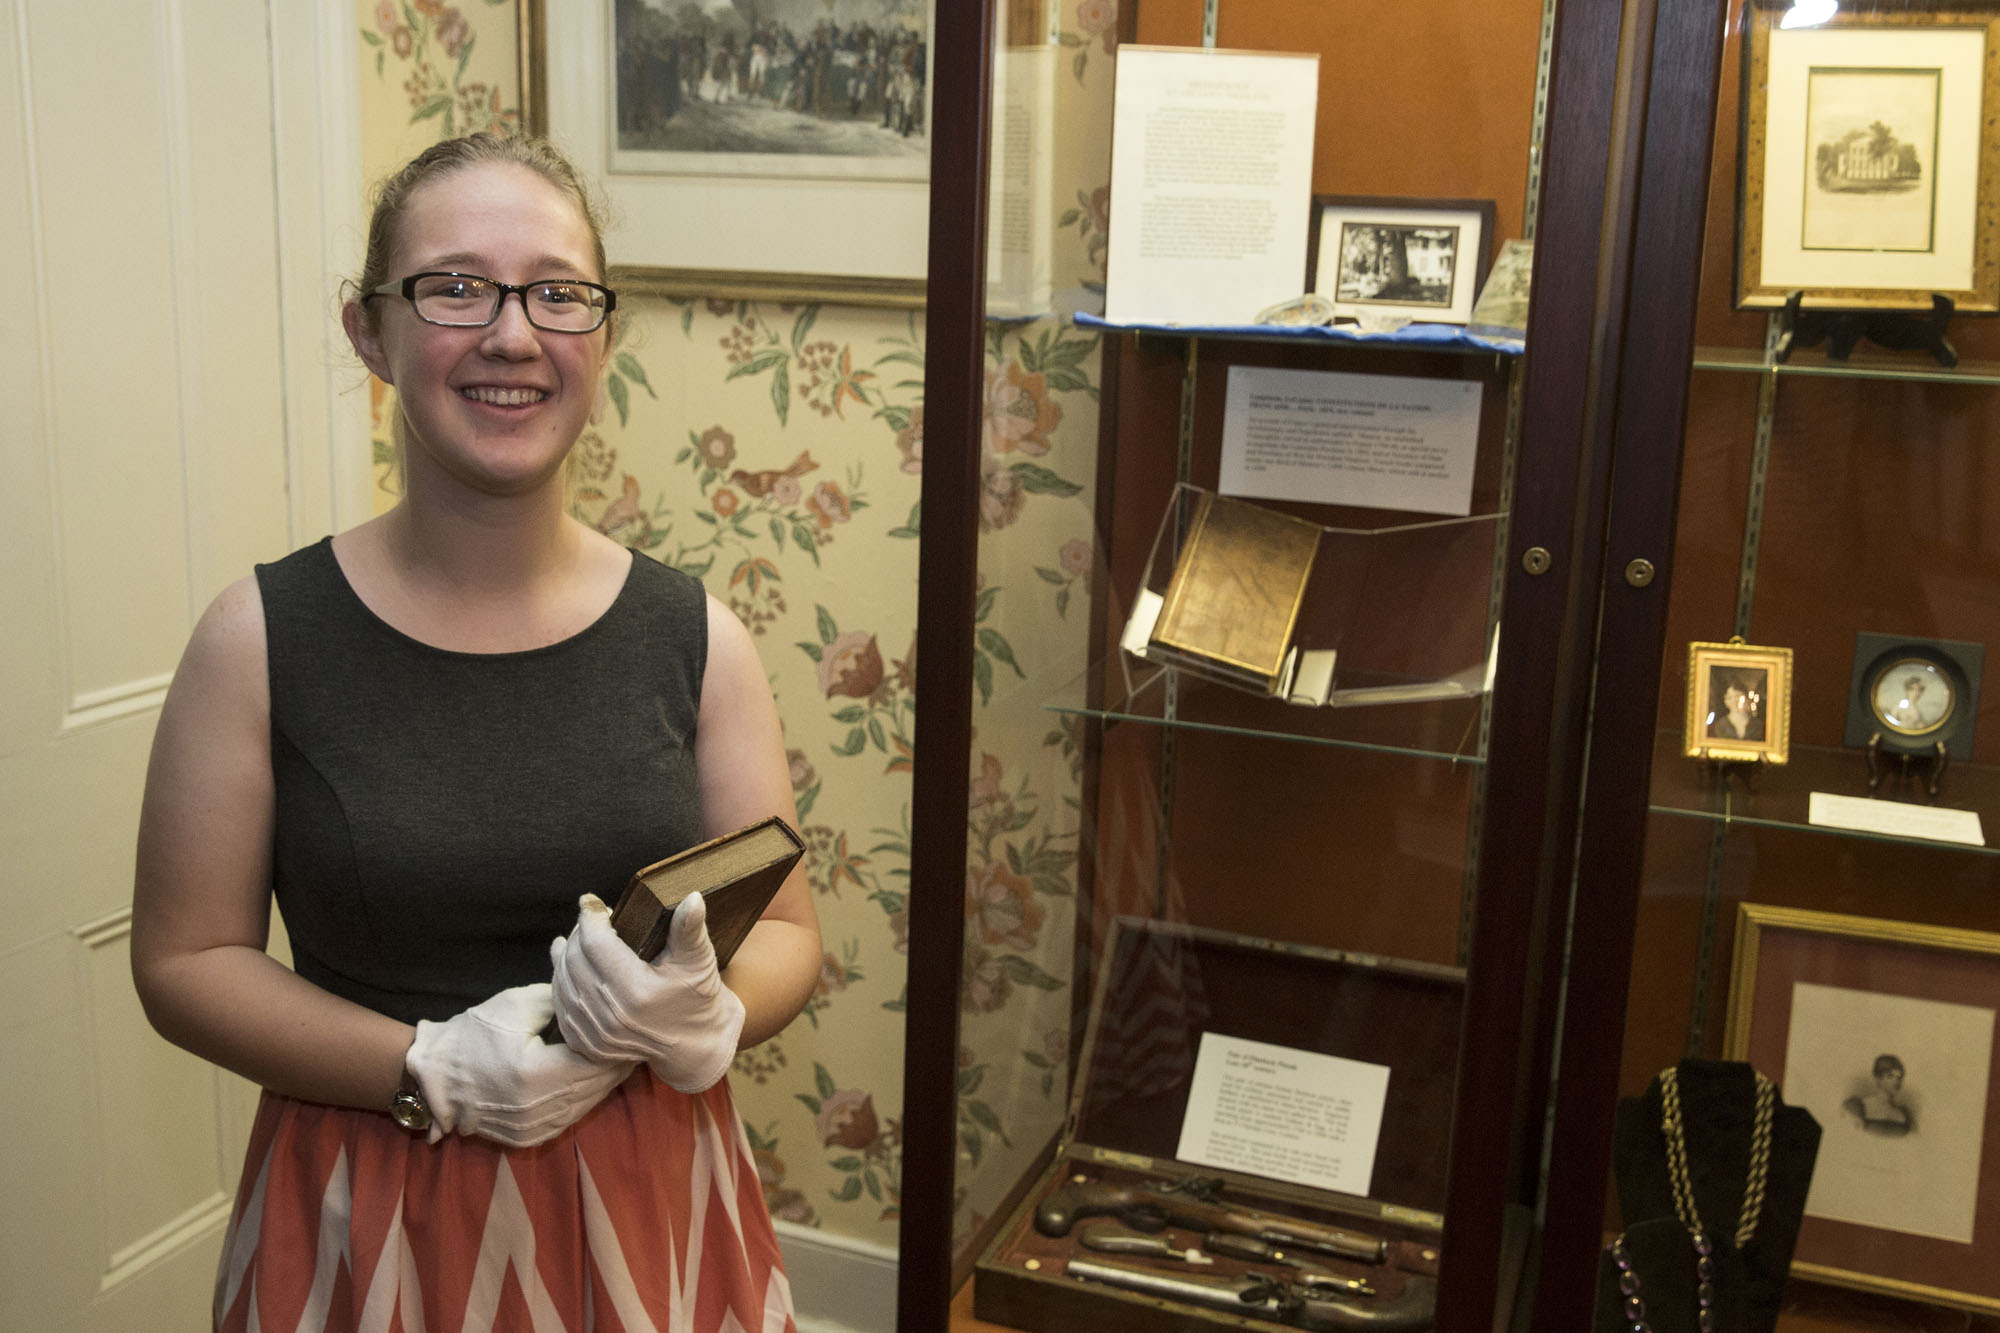 Ashley Spinks holds a book from James Monroe's house next to a cabinet while smiling at the camera